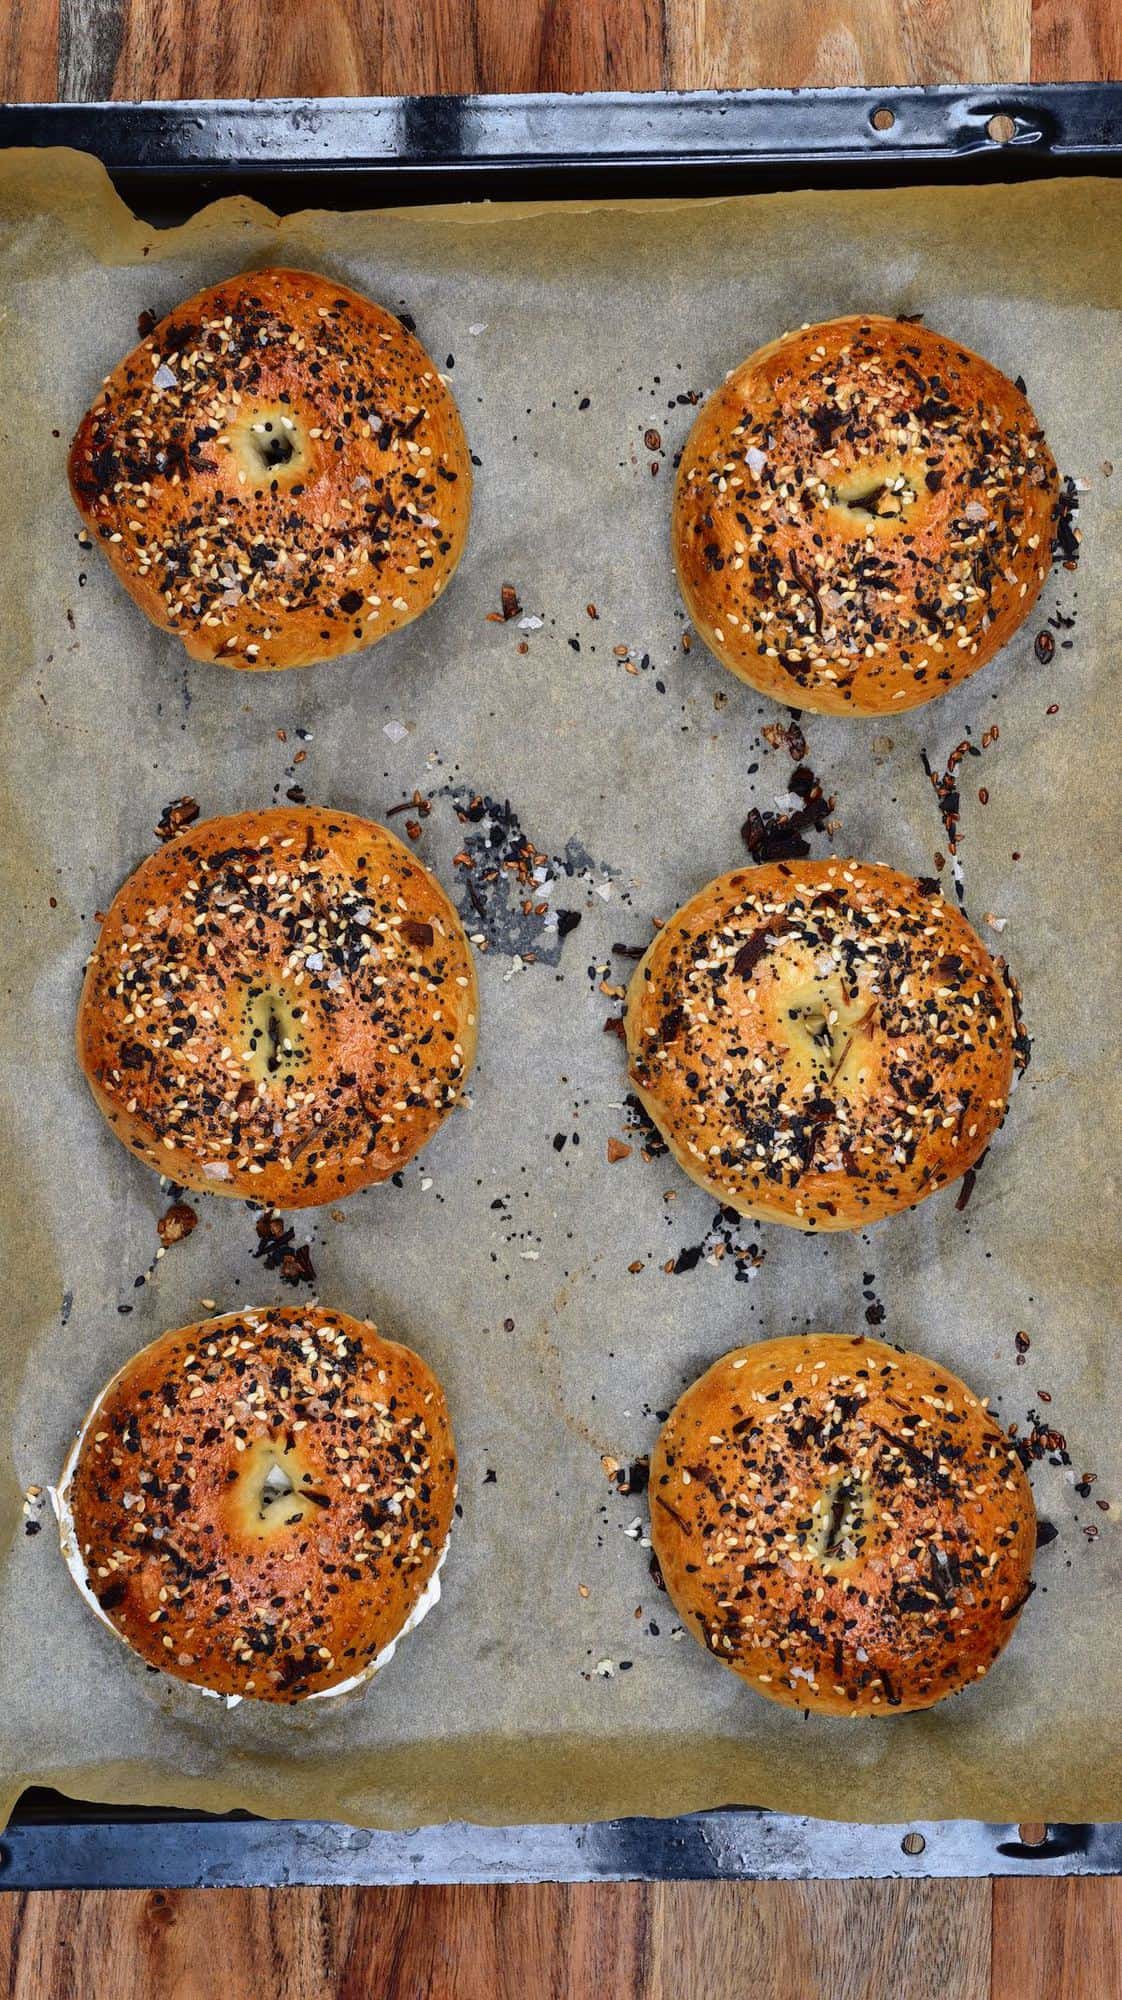 Six freshly baked bagels in a baking tray